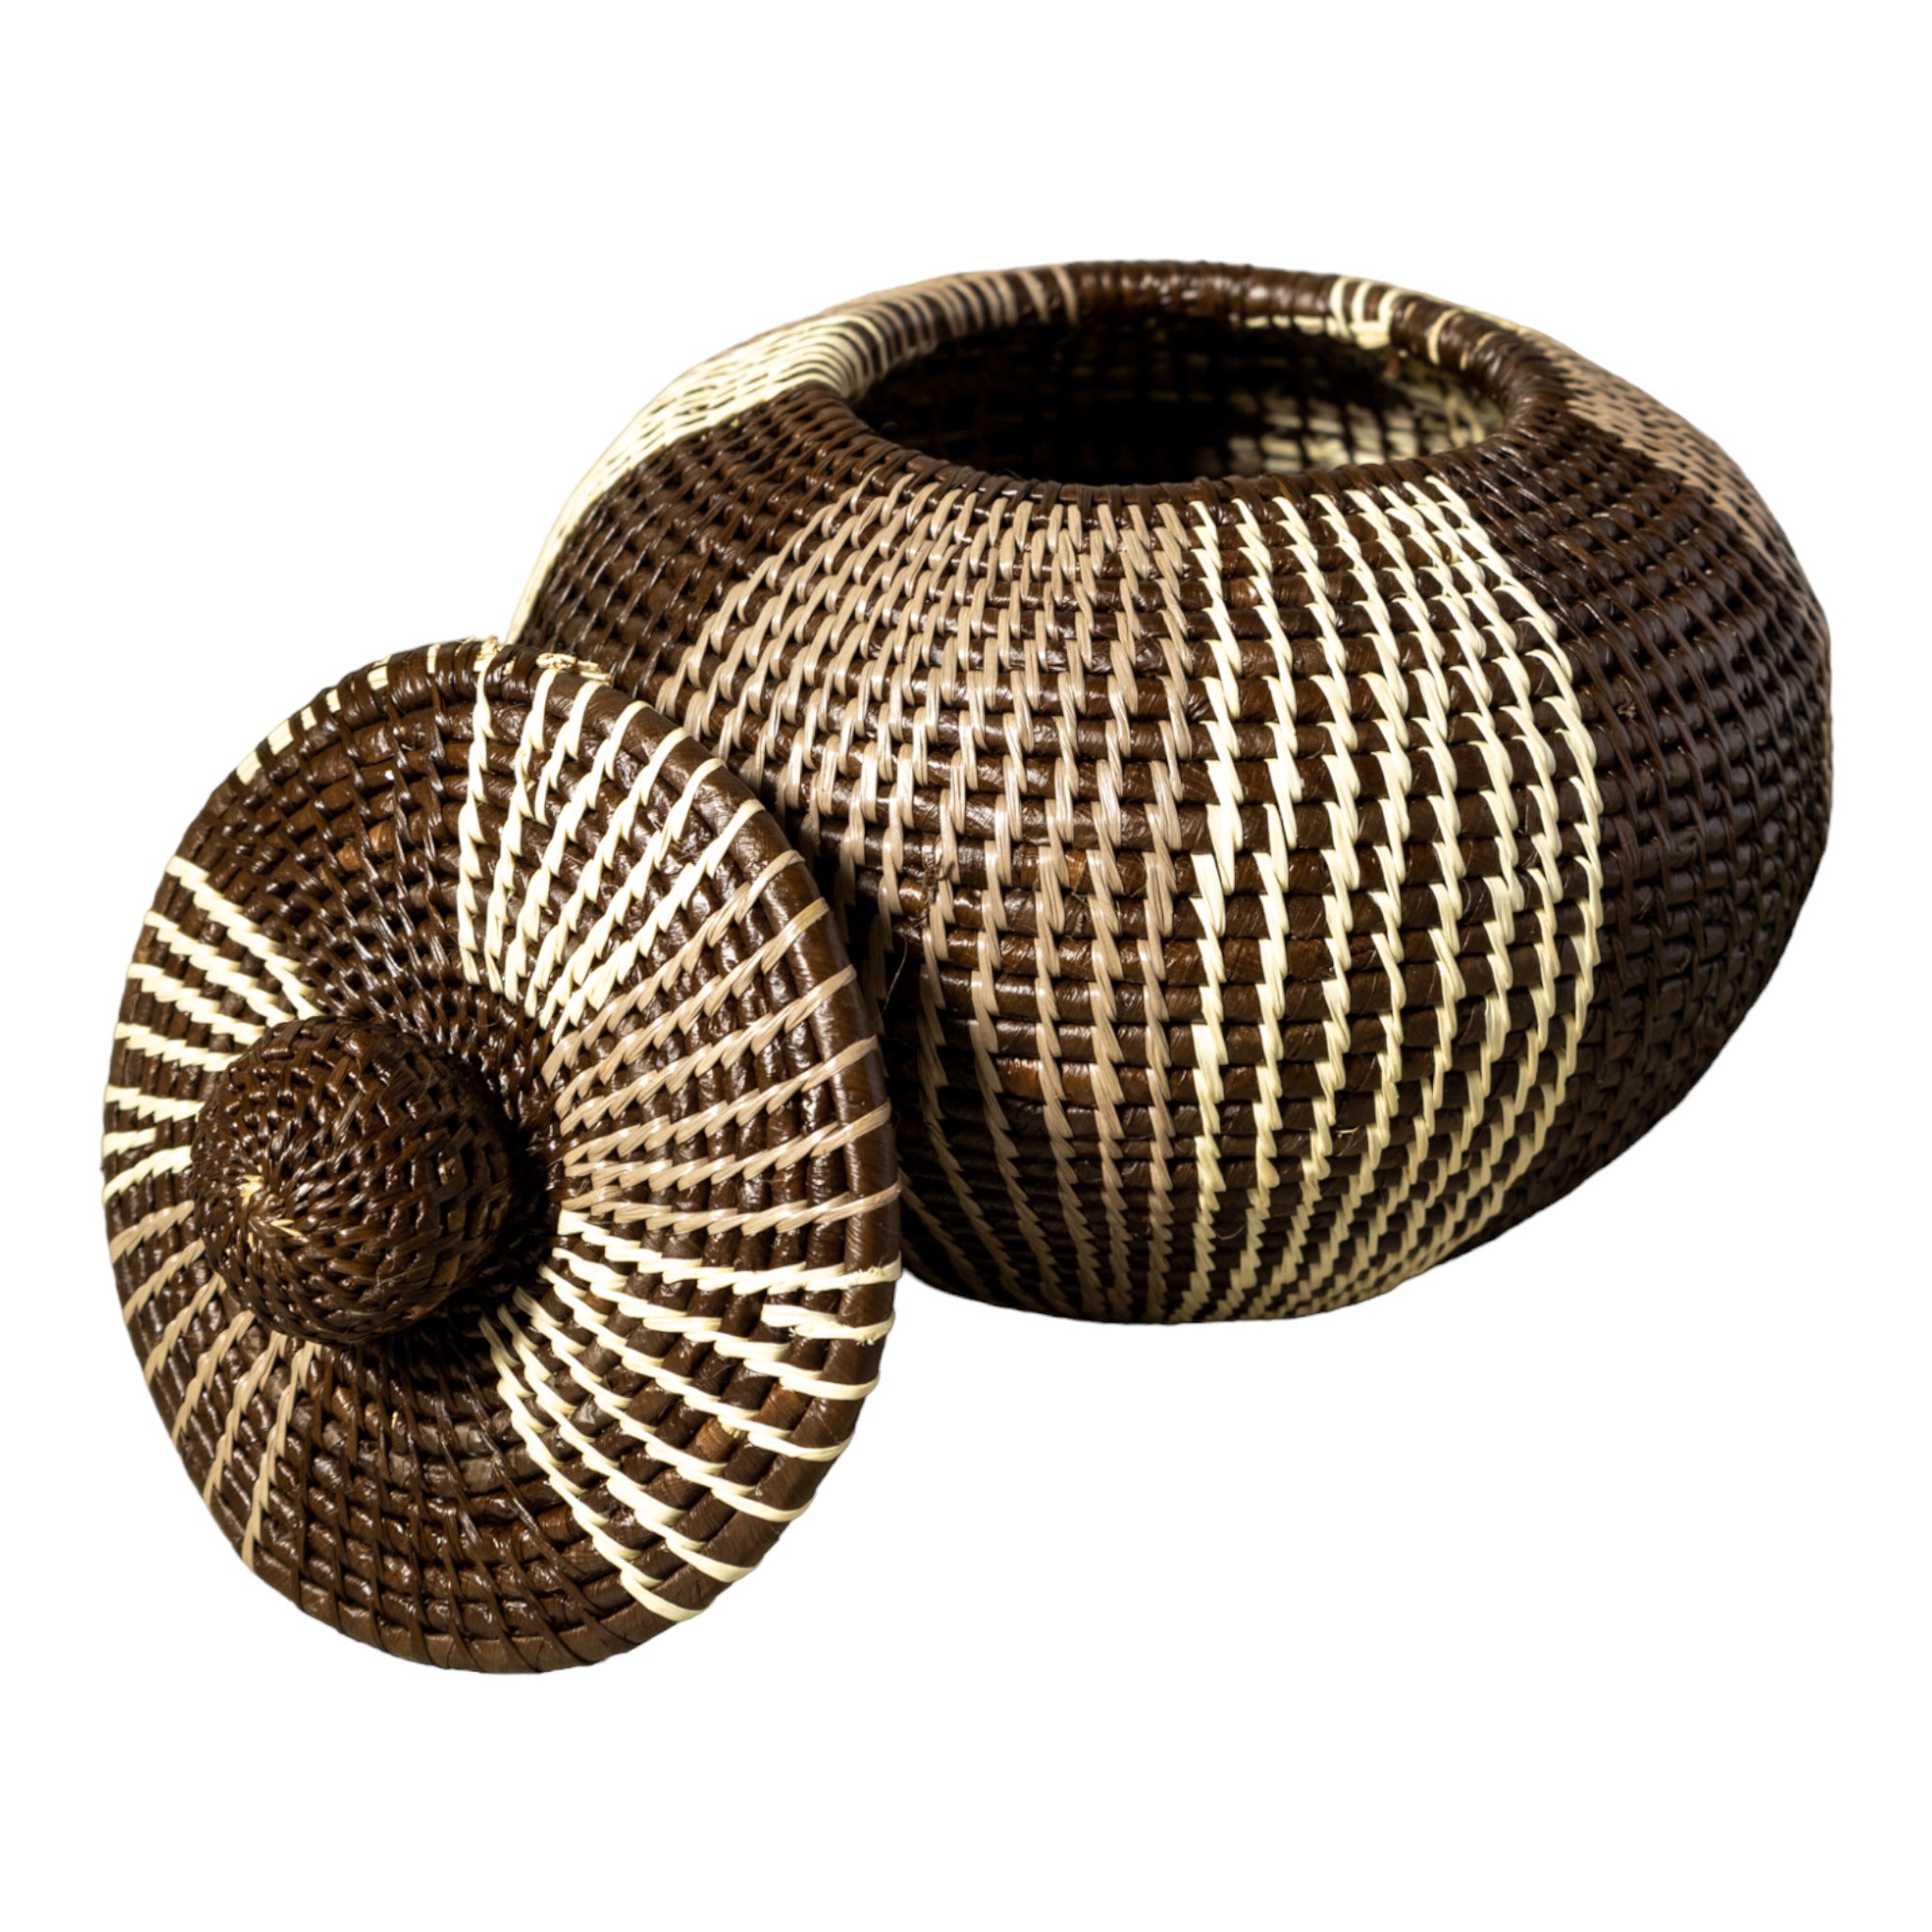 Brown And White Jungle Essence Woven Basket With Top